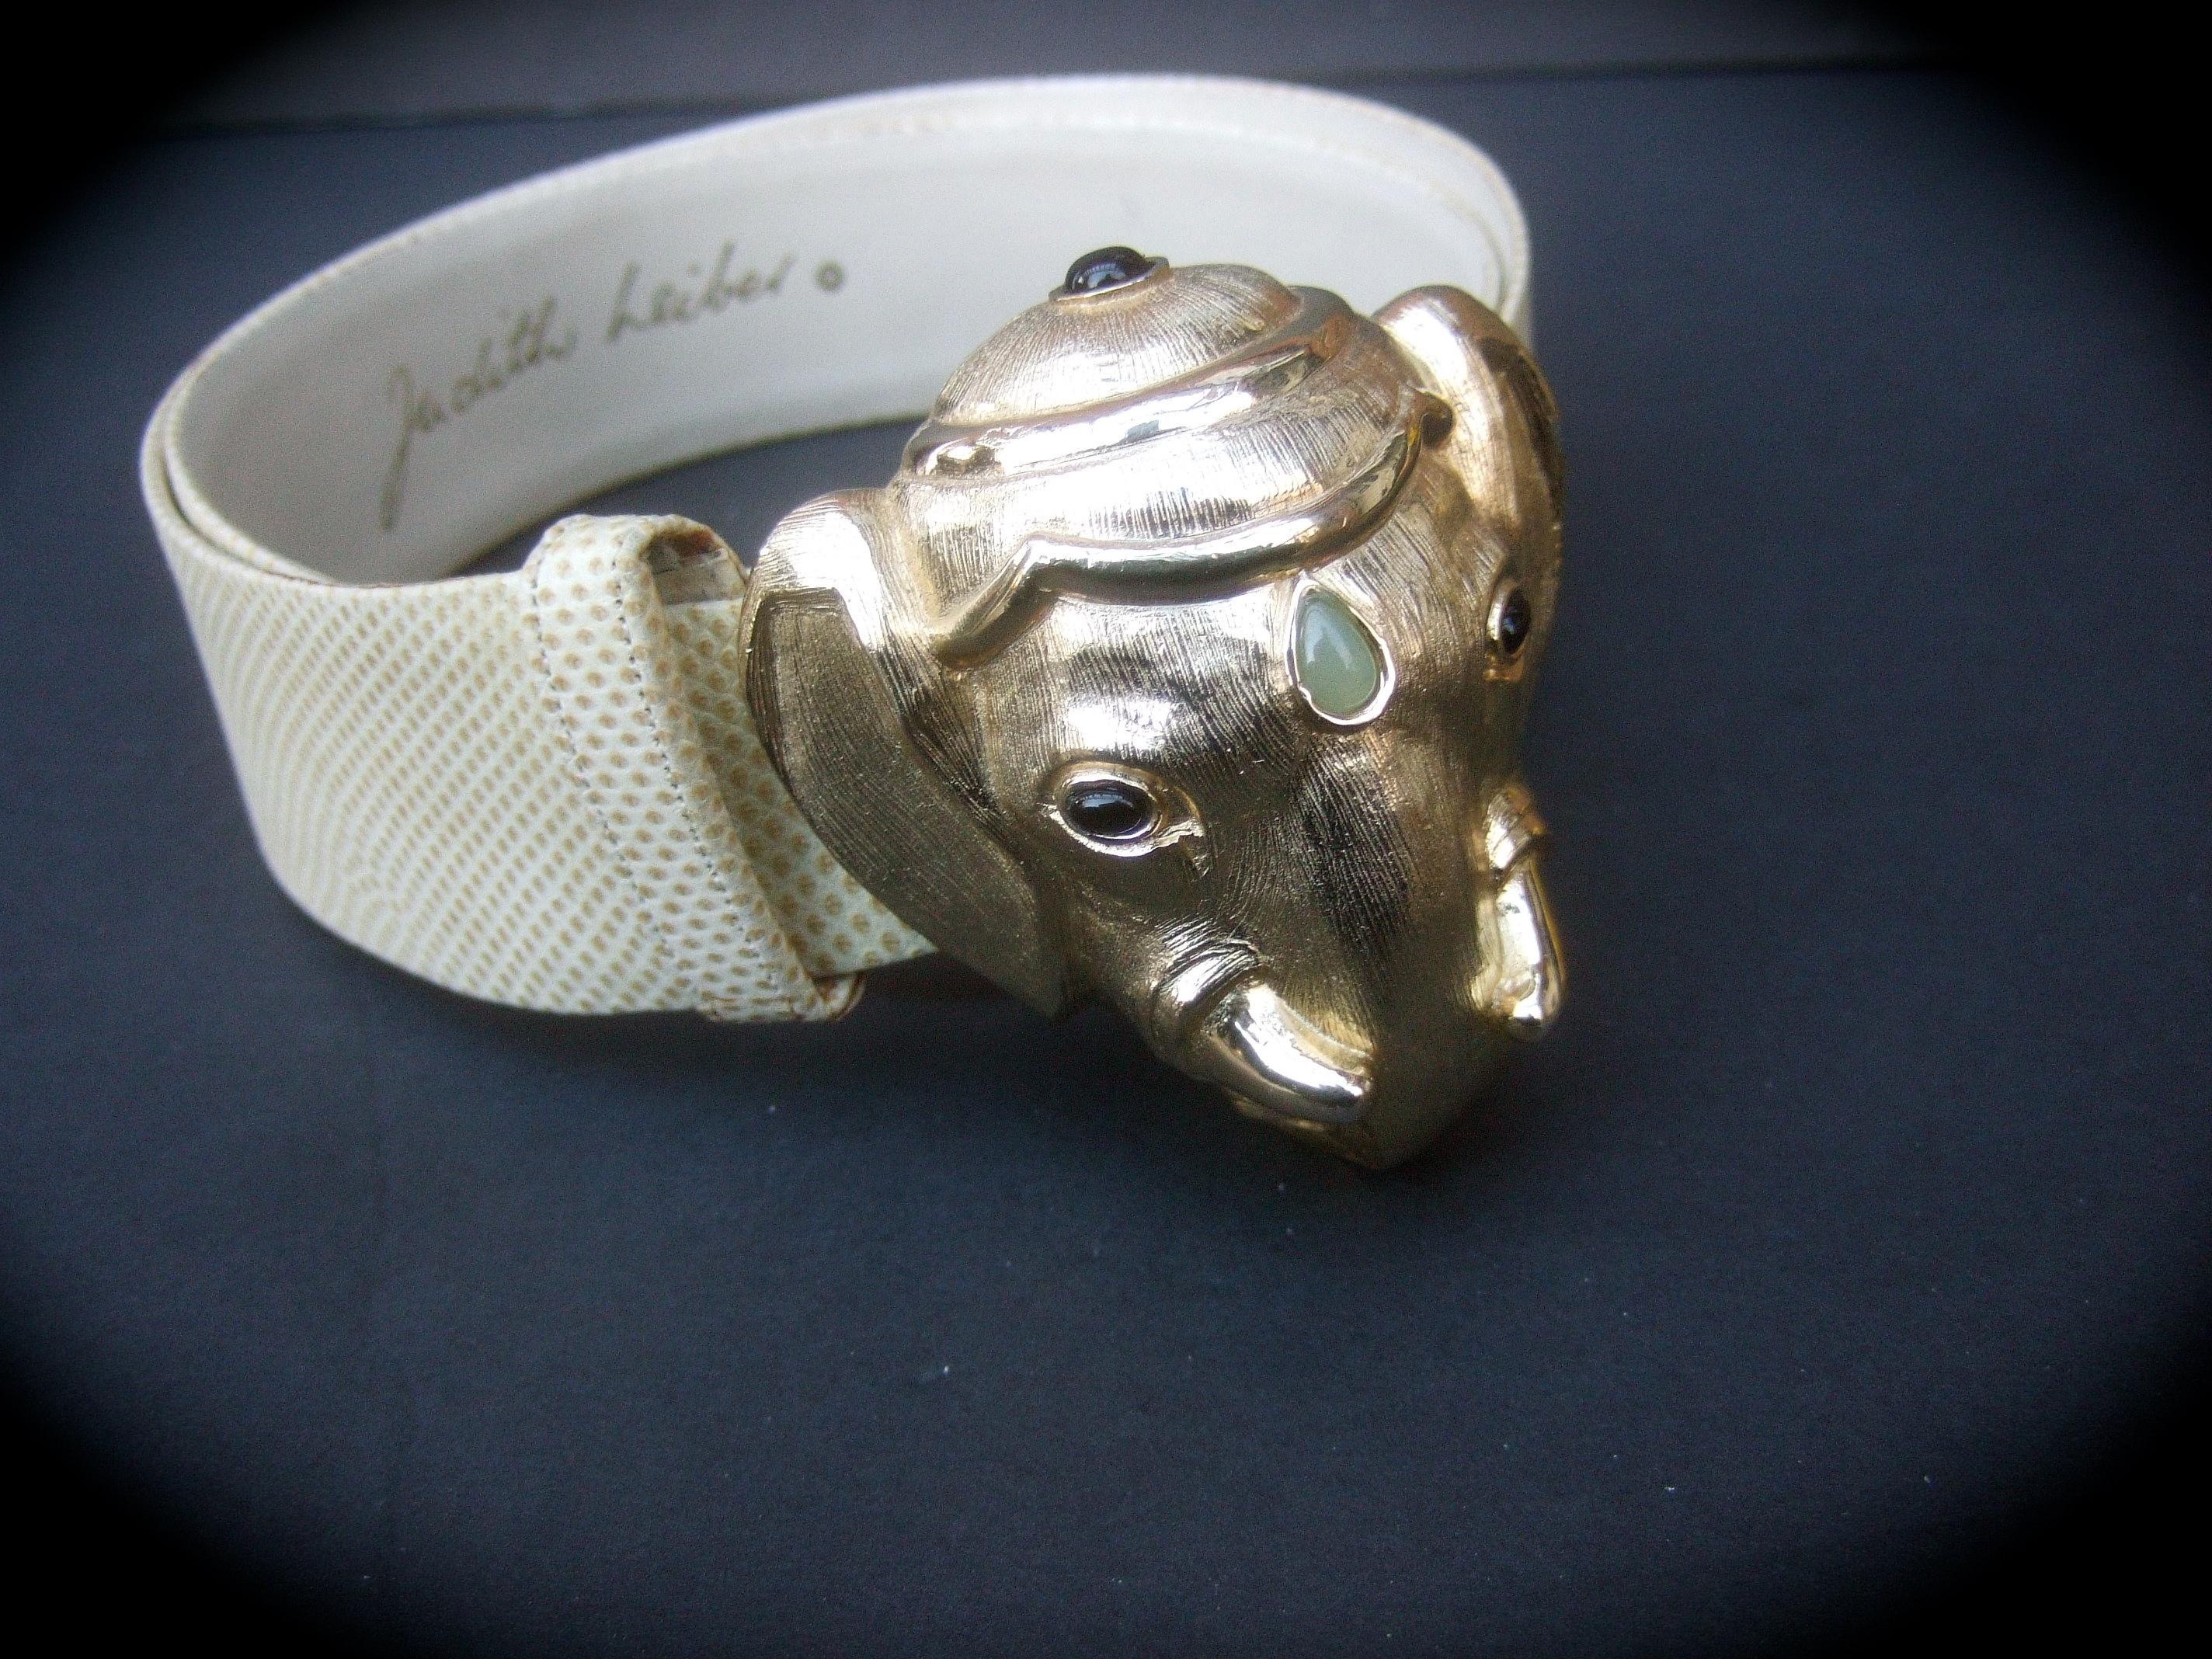 Judith Leiber Jeweled gilt metal elephant buckle belt c 1980s
The opulent belt is adorned with a large scale brushed gilt metal elephant head buckle; embellished with a collection of glass stones that serves as the eyes & decorate the buckle

Paired